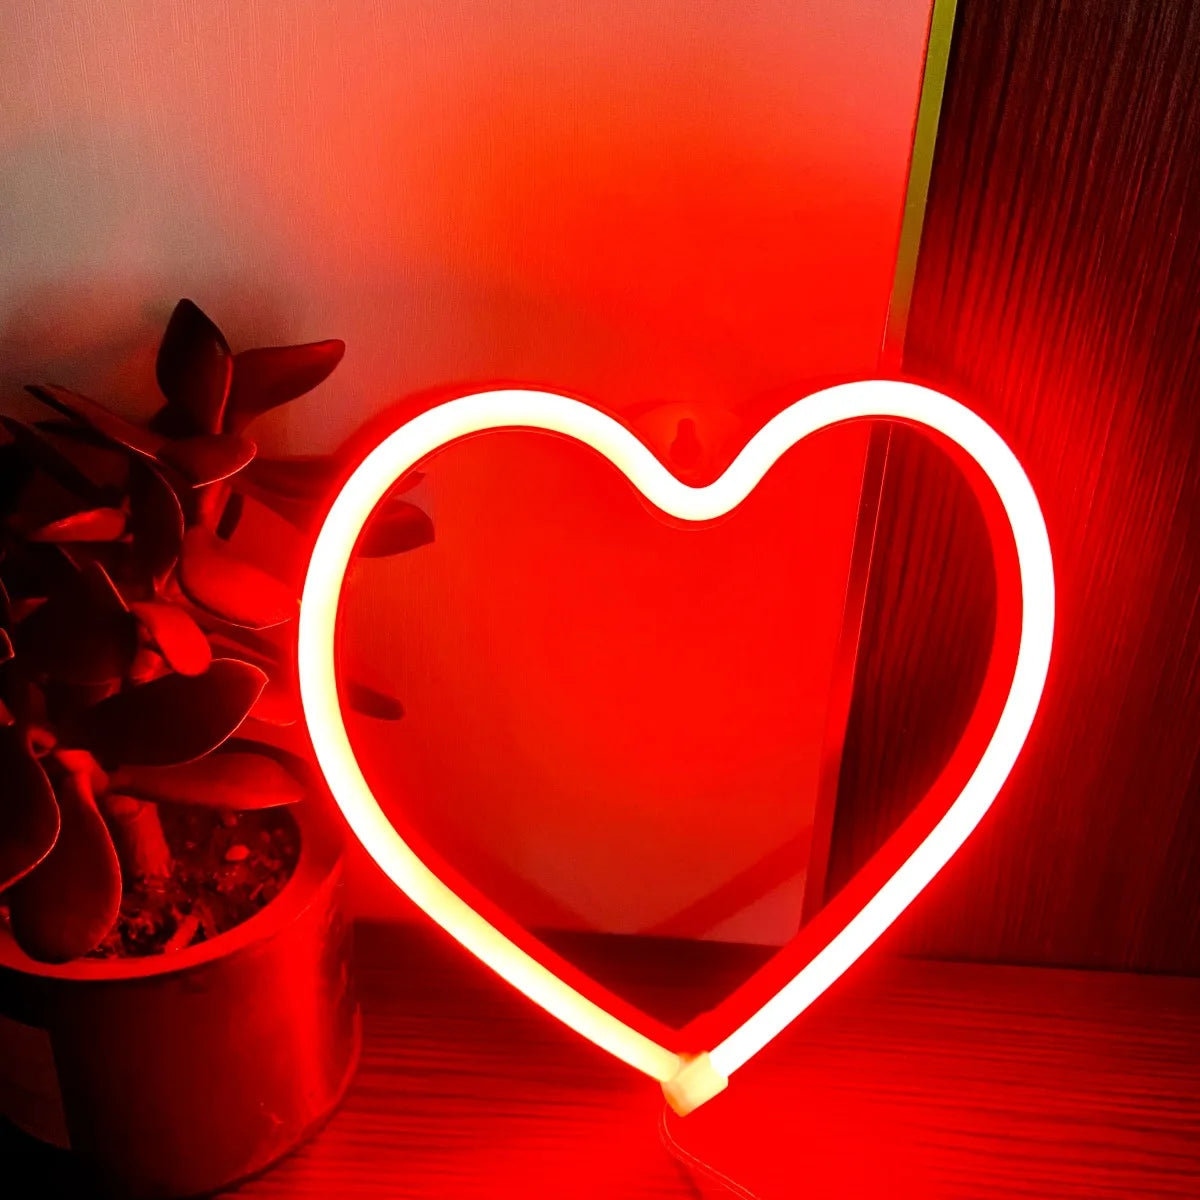 Night Light LED Love Neon Lamp Valentine's Wedding Proposal Birthday Confession Mother's Day Gift Camping Decoration Lighting